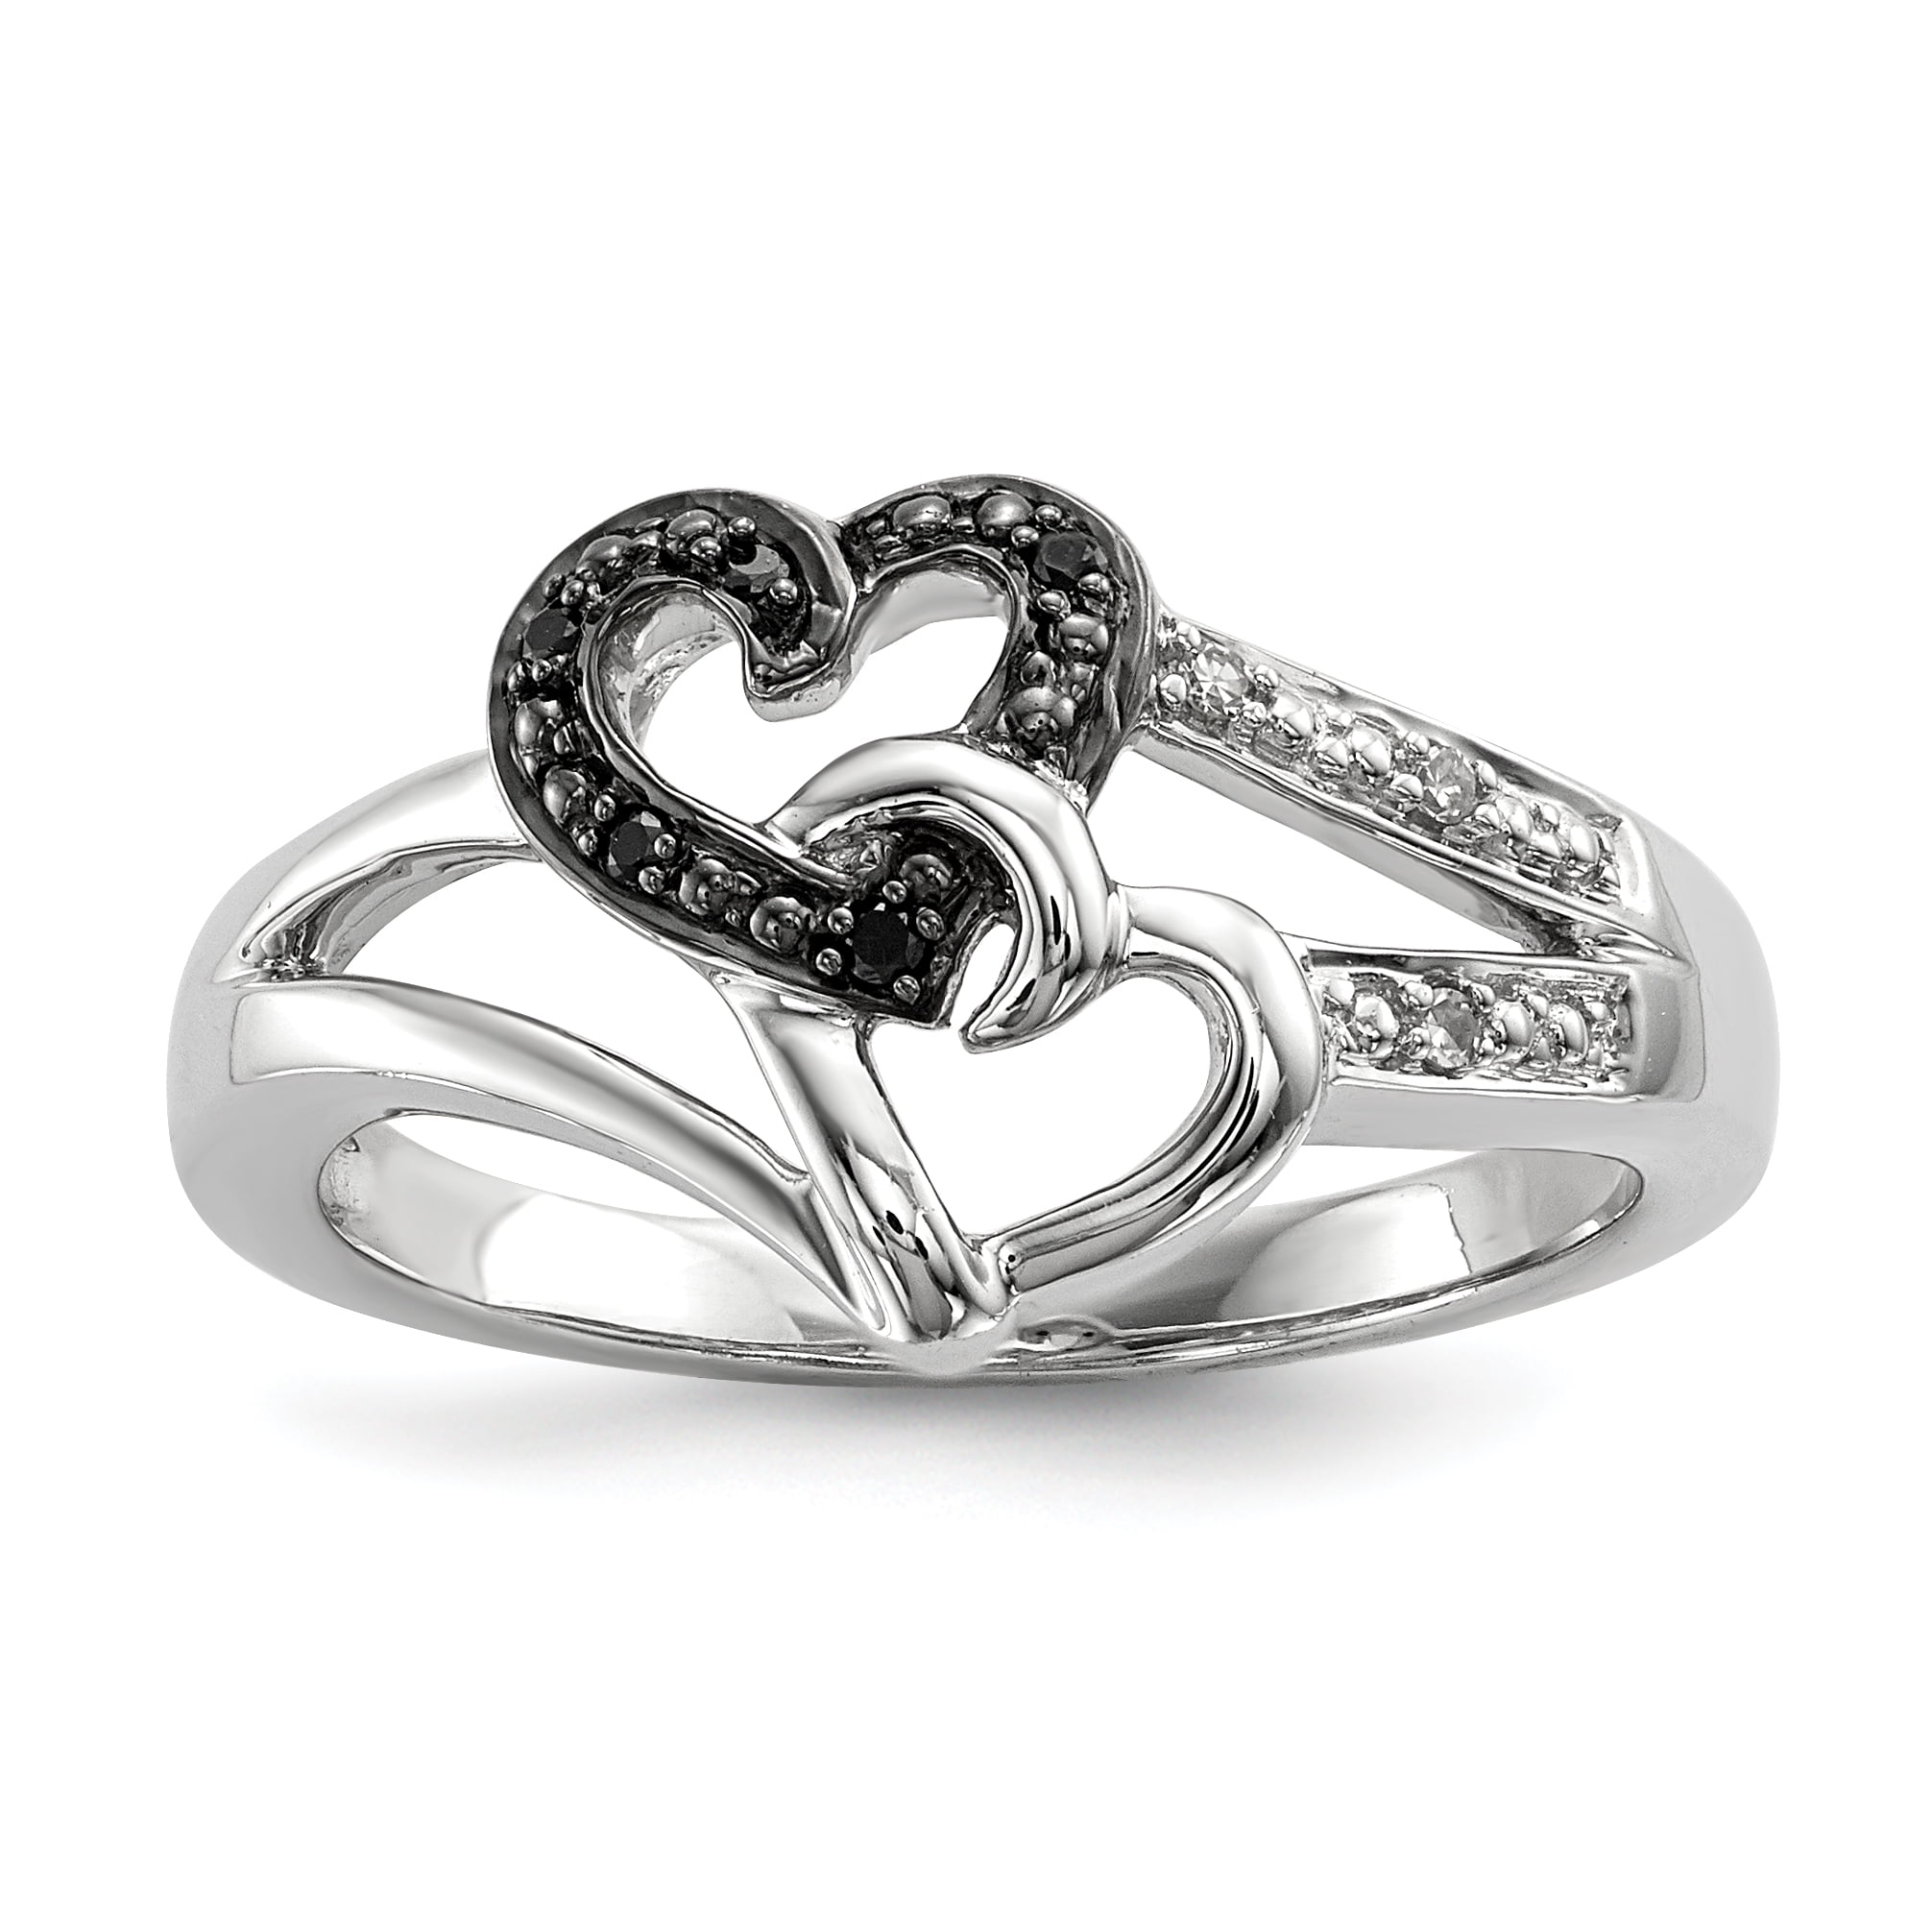 Sterling Silver Black and White Diamond Ring